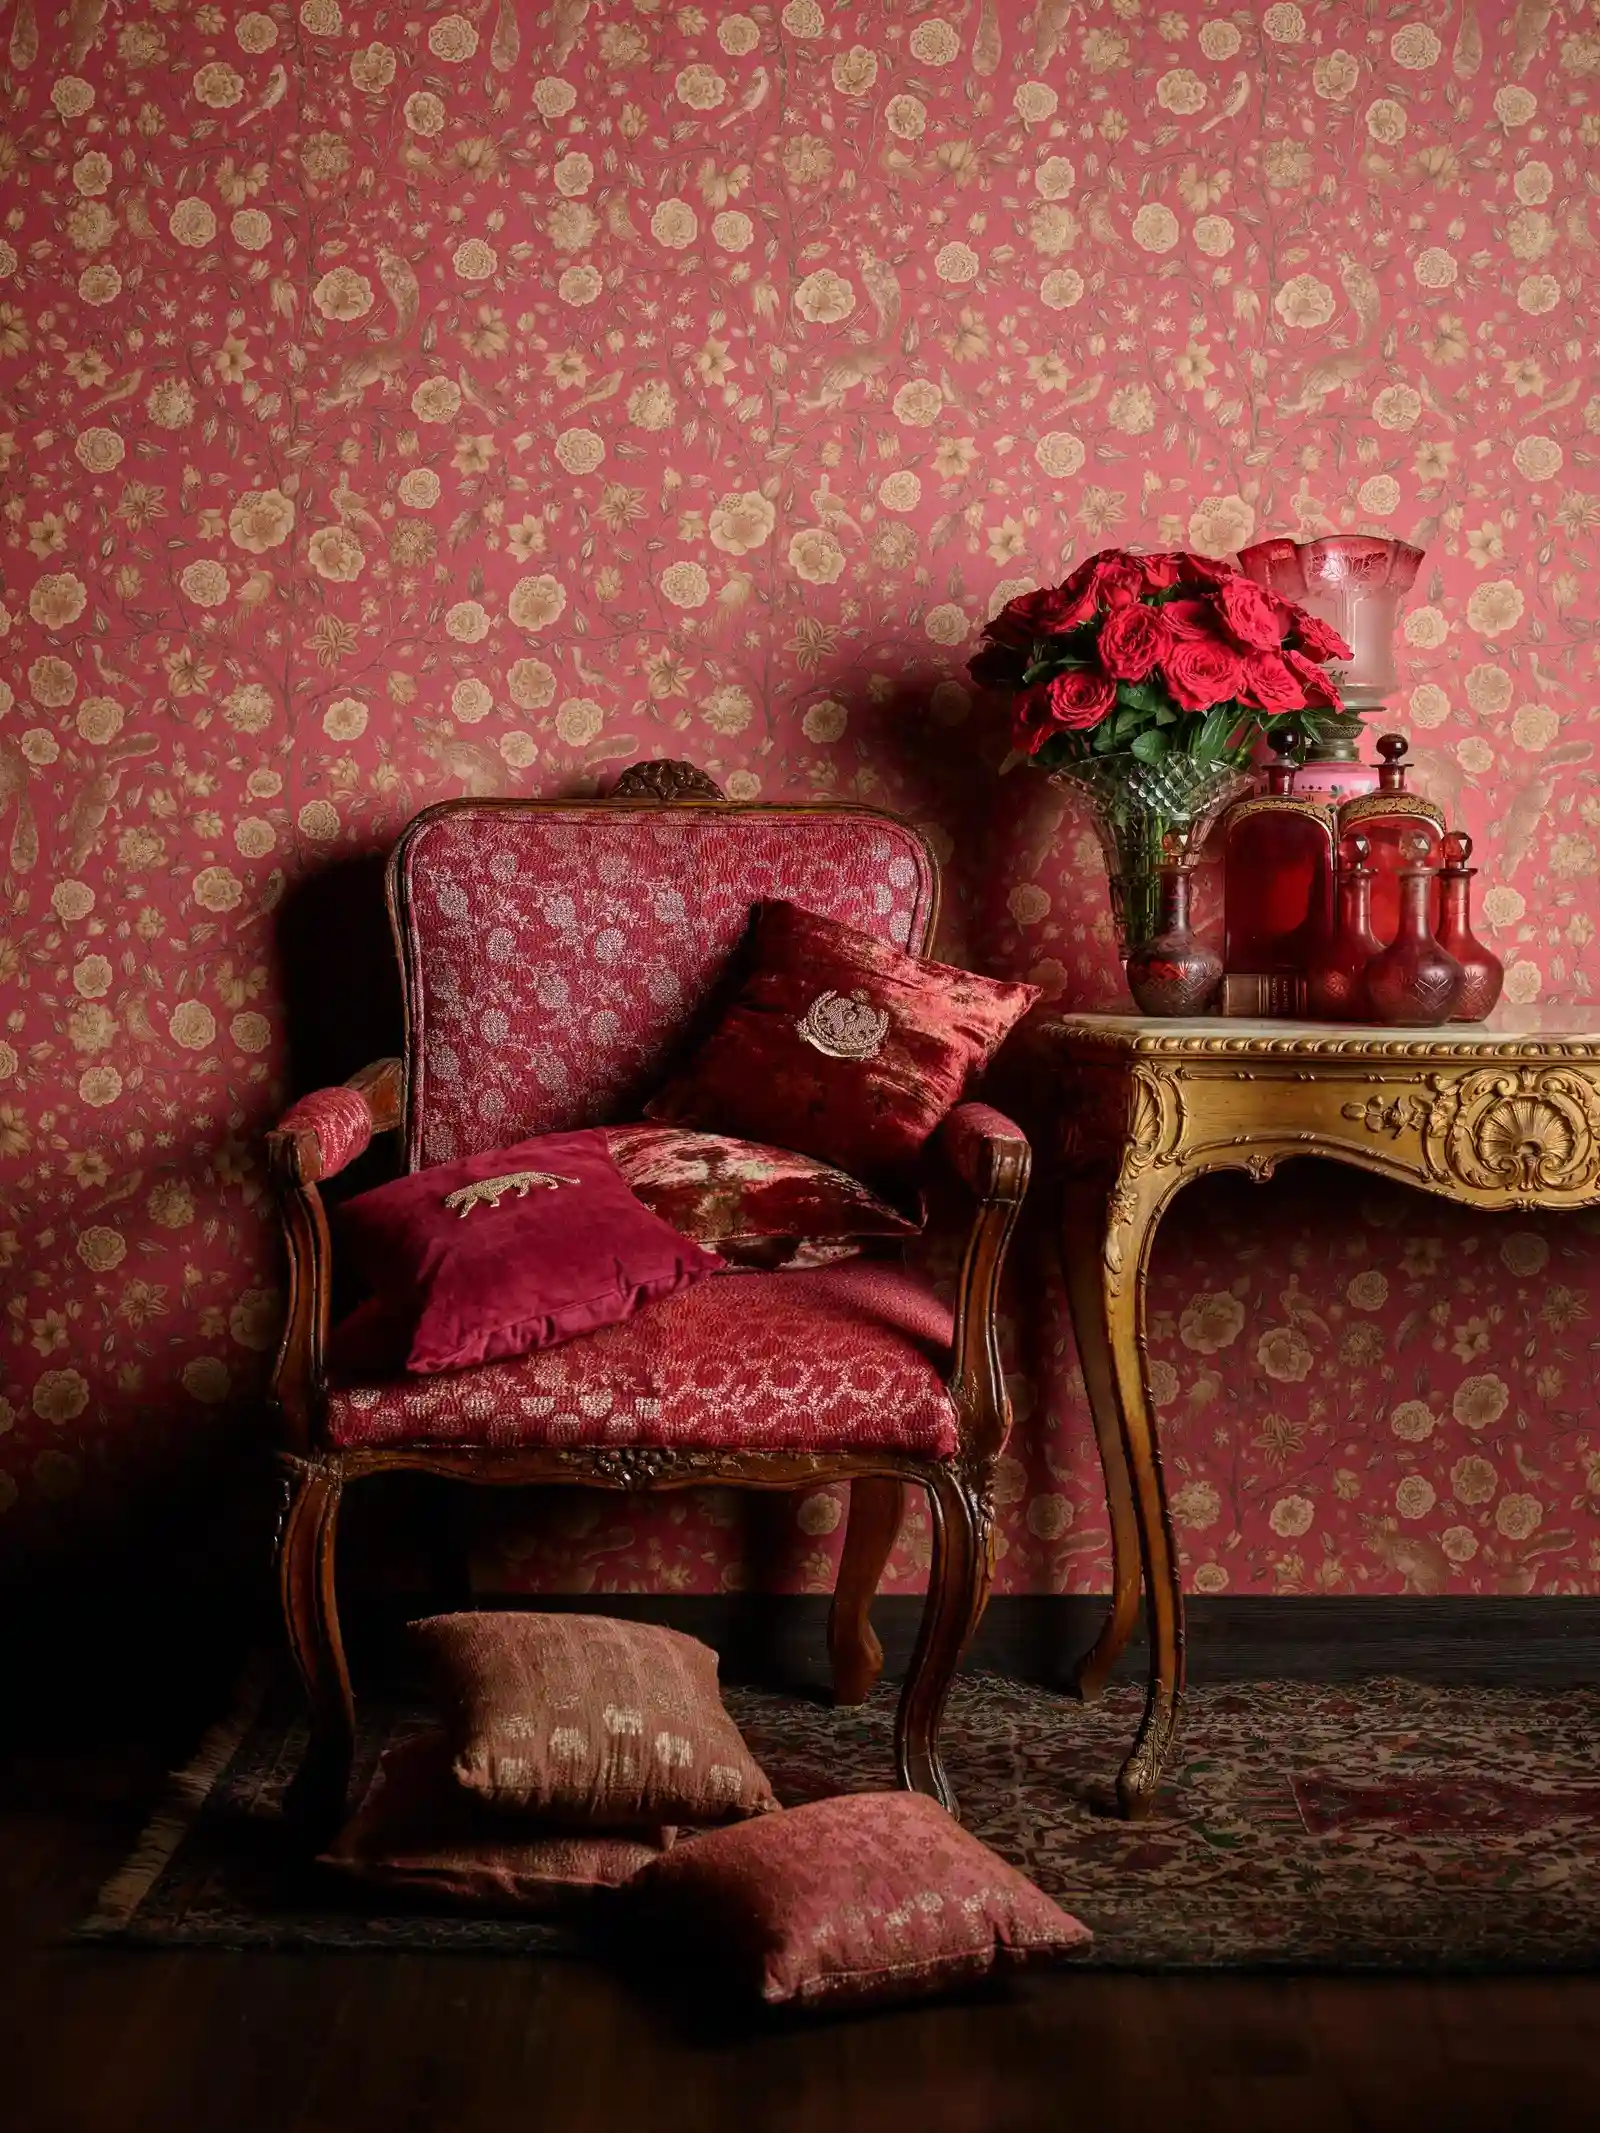 stunning red wall decor, red wooden up،lstered chair, wooden table with a flower vase placed on it, red roses